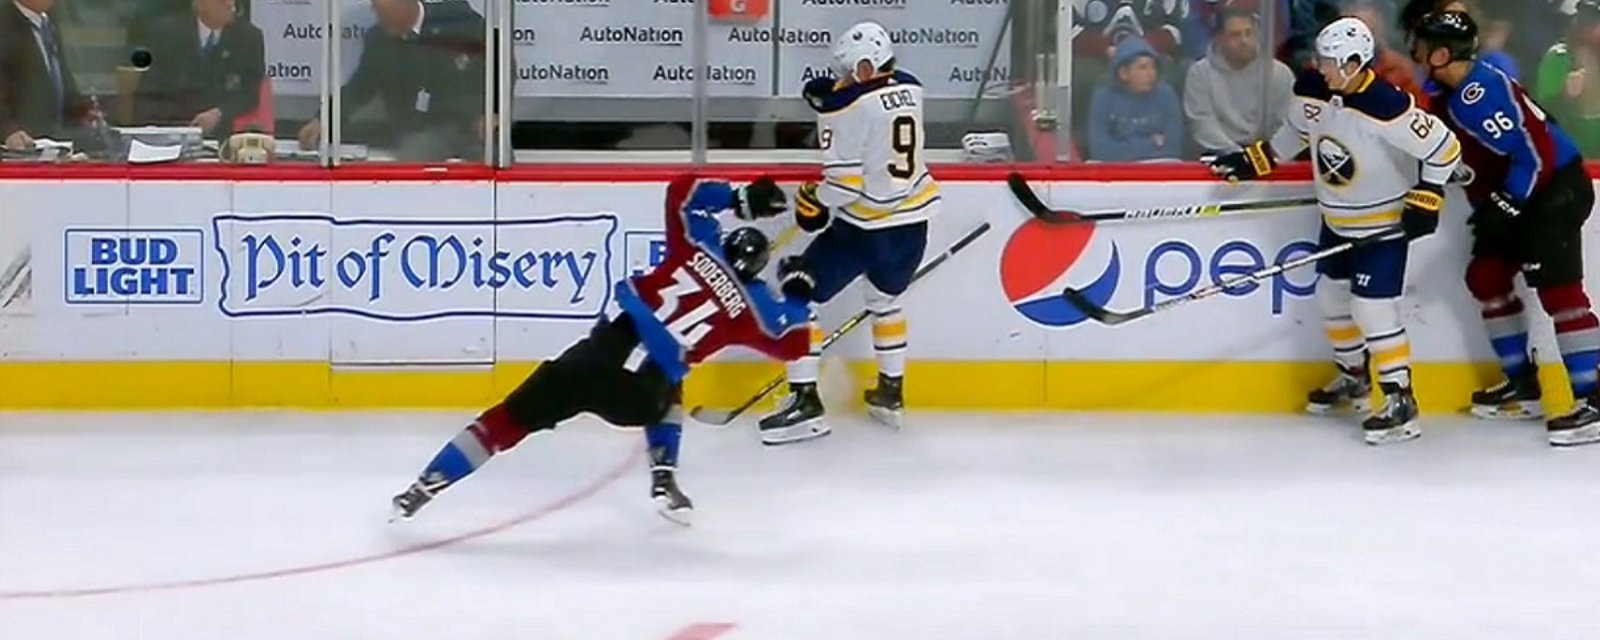 Eichel gets his revenge with a cheap shot on Soderberg.